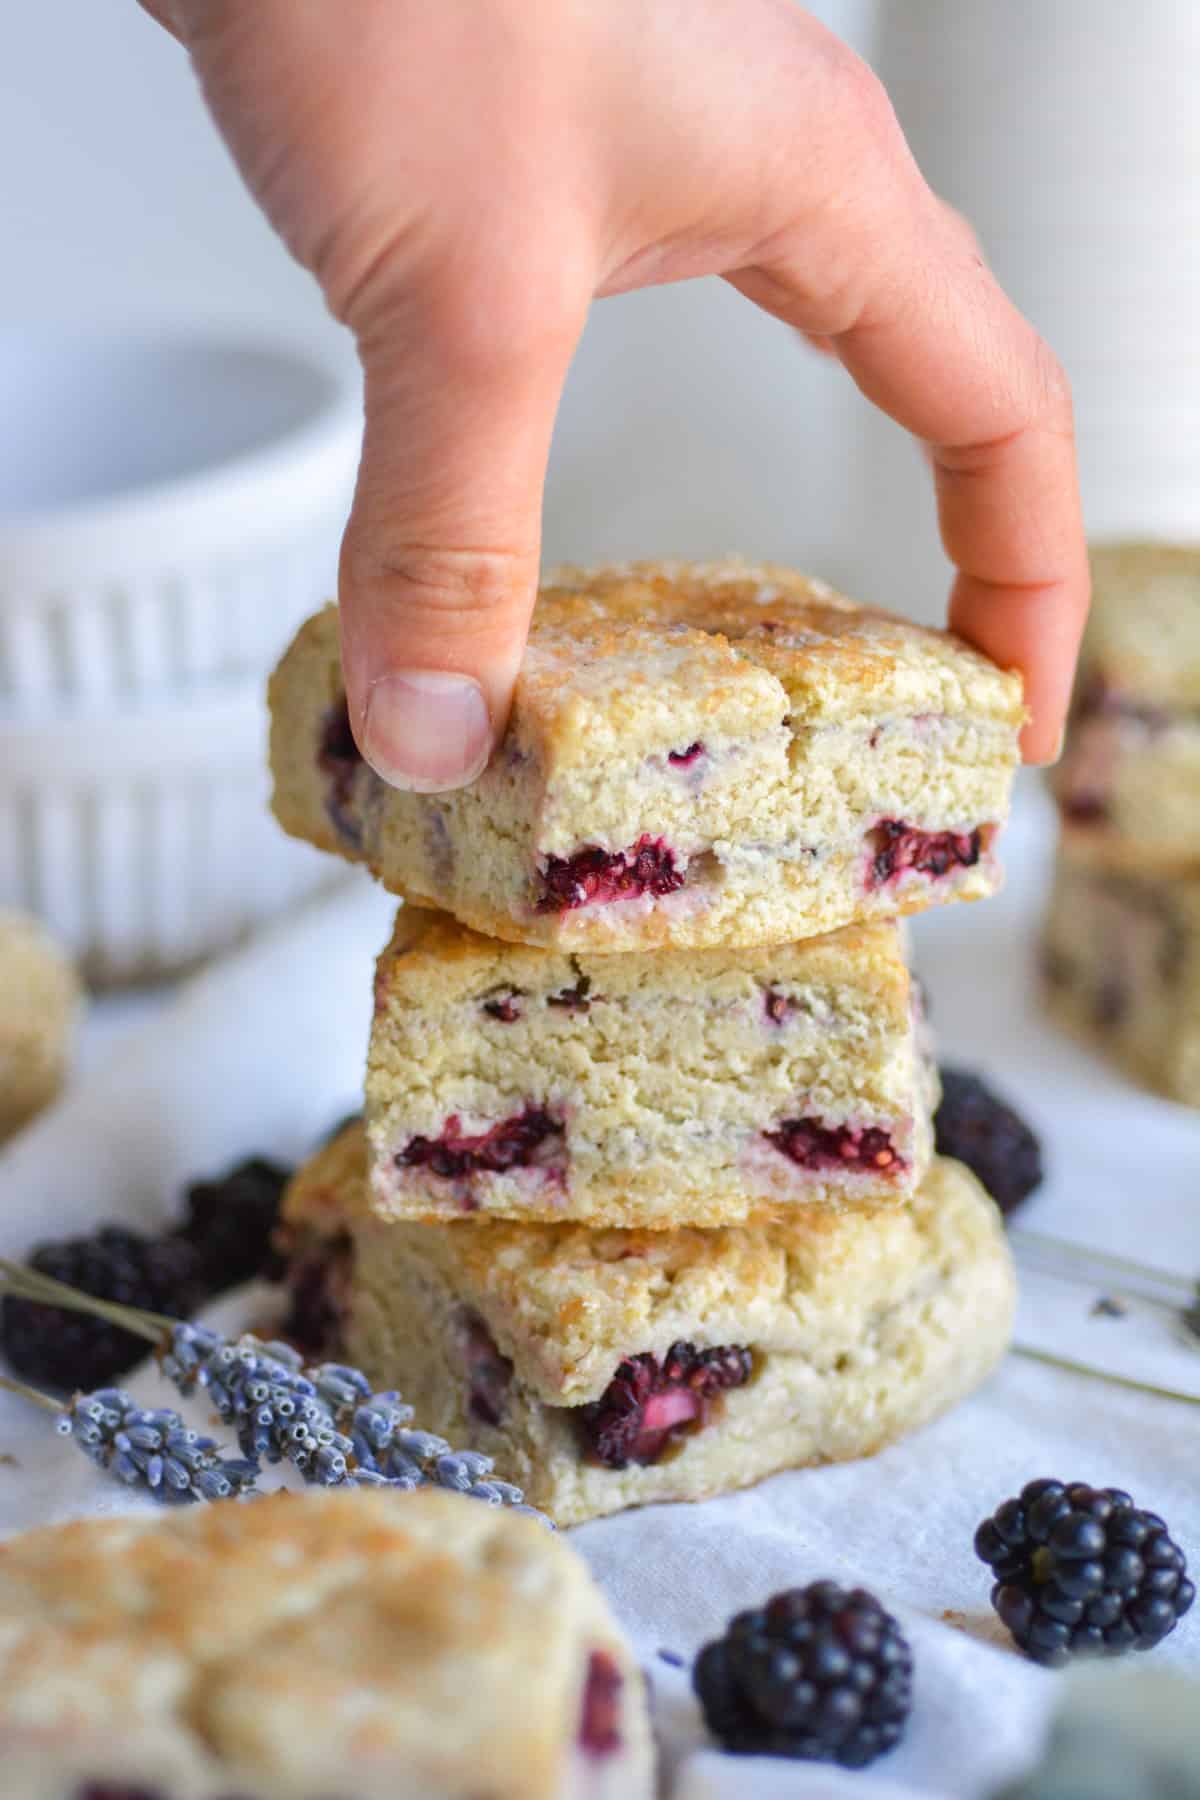 Hand placing a gluten free vegan scone on top of a stack